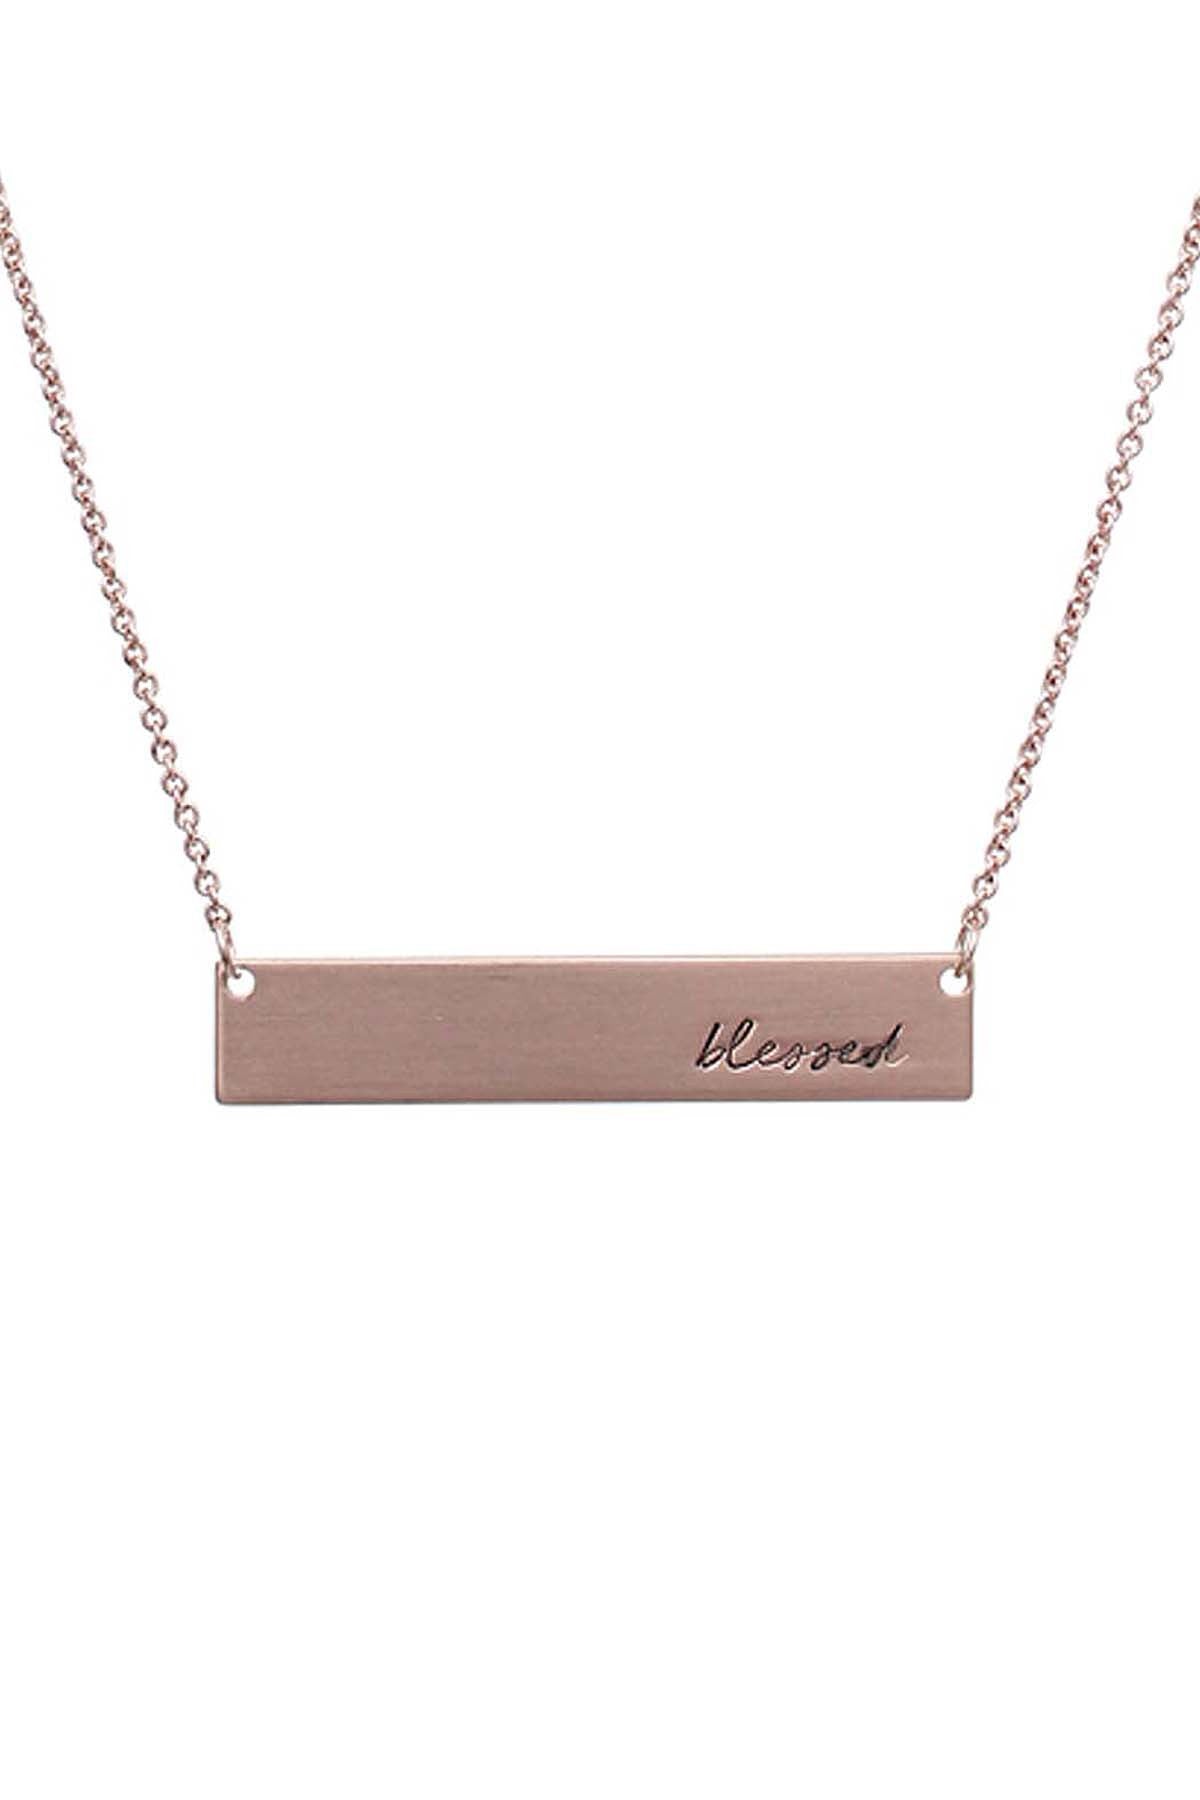 BAR BLESSED NECKLACE